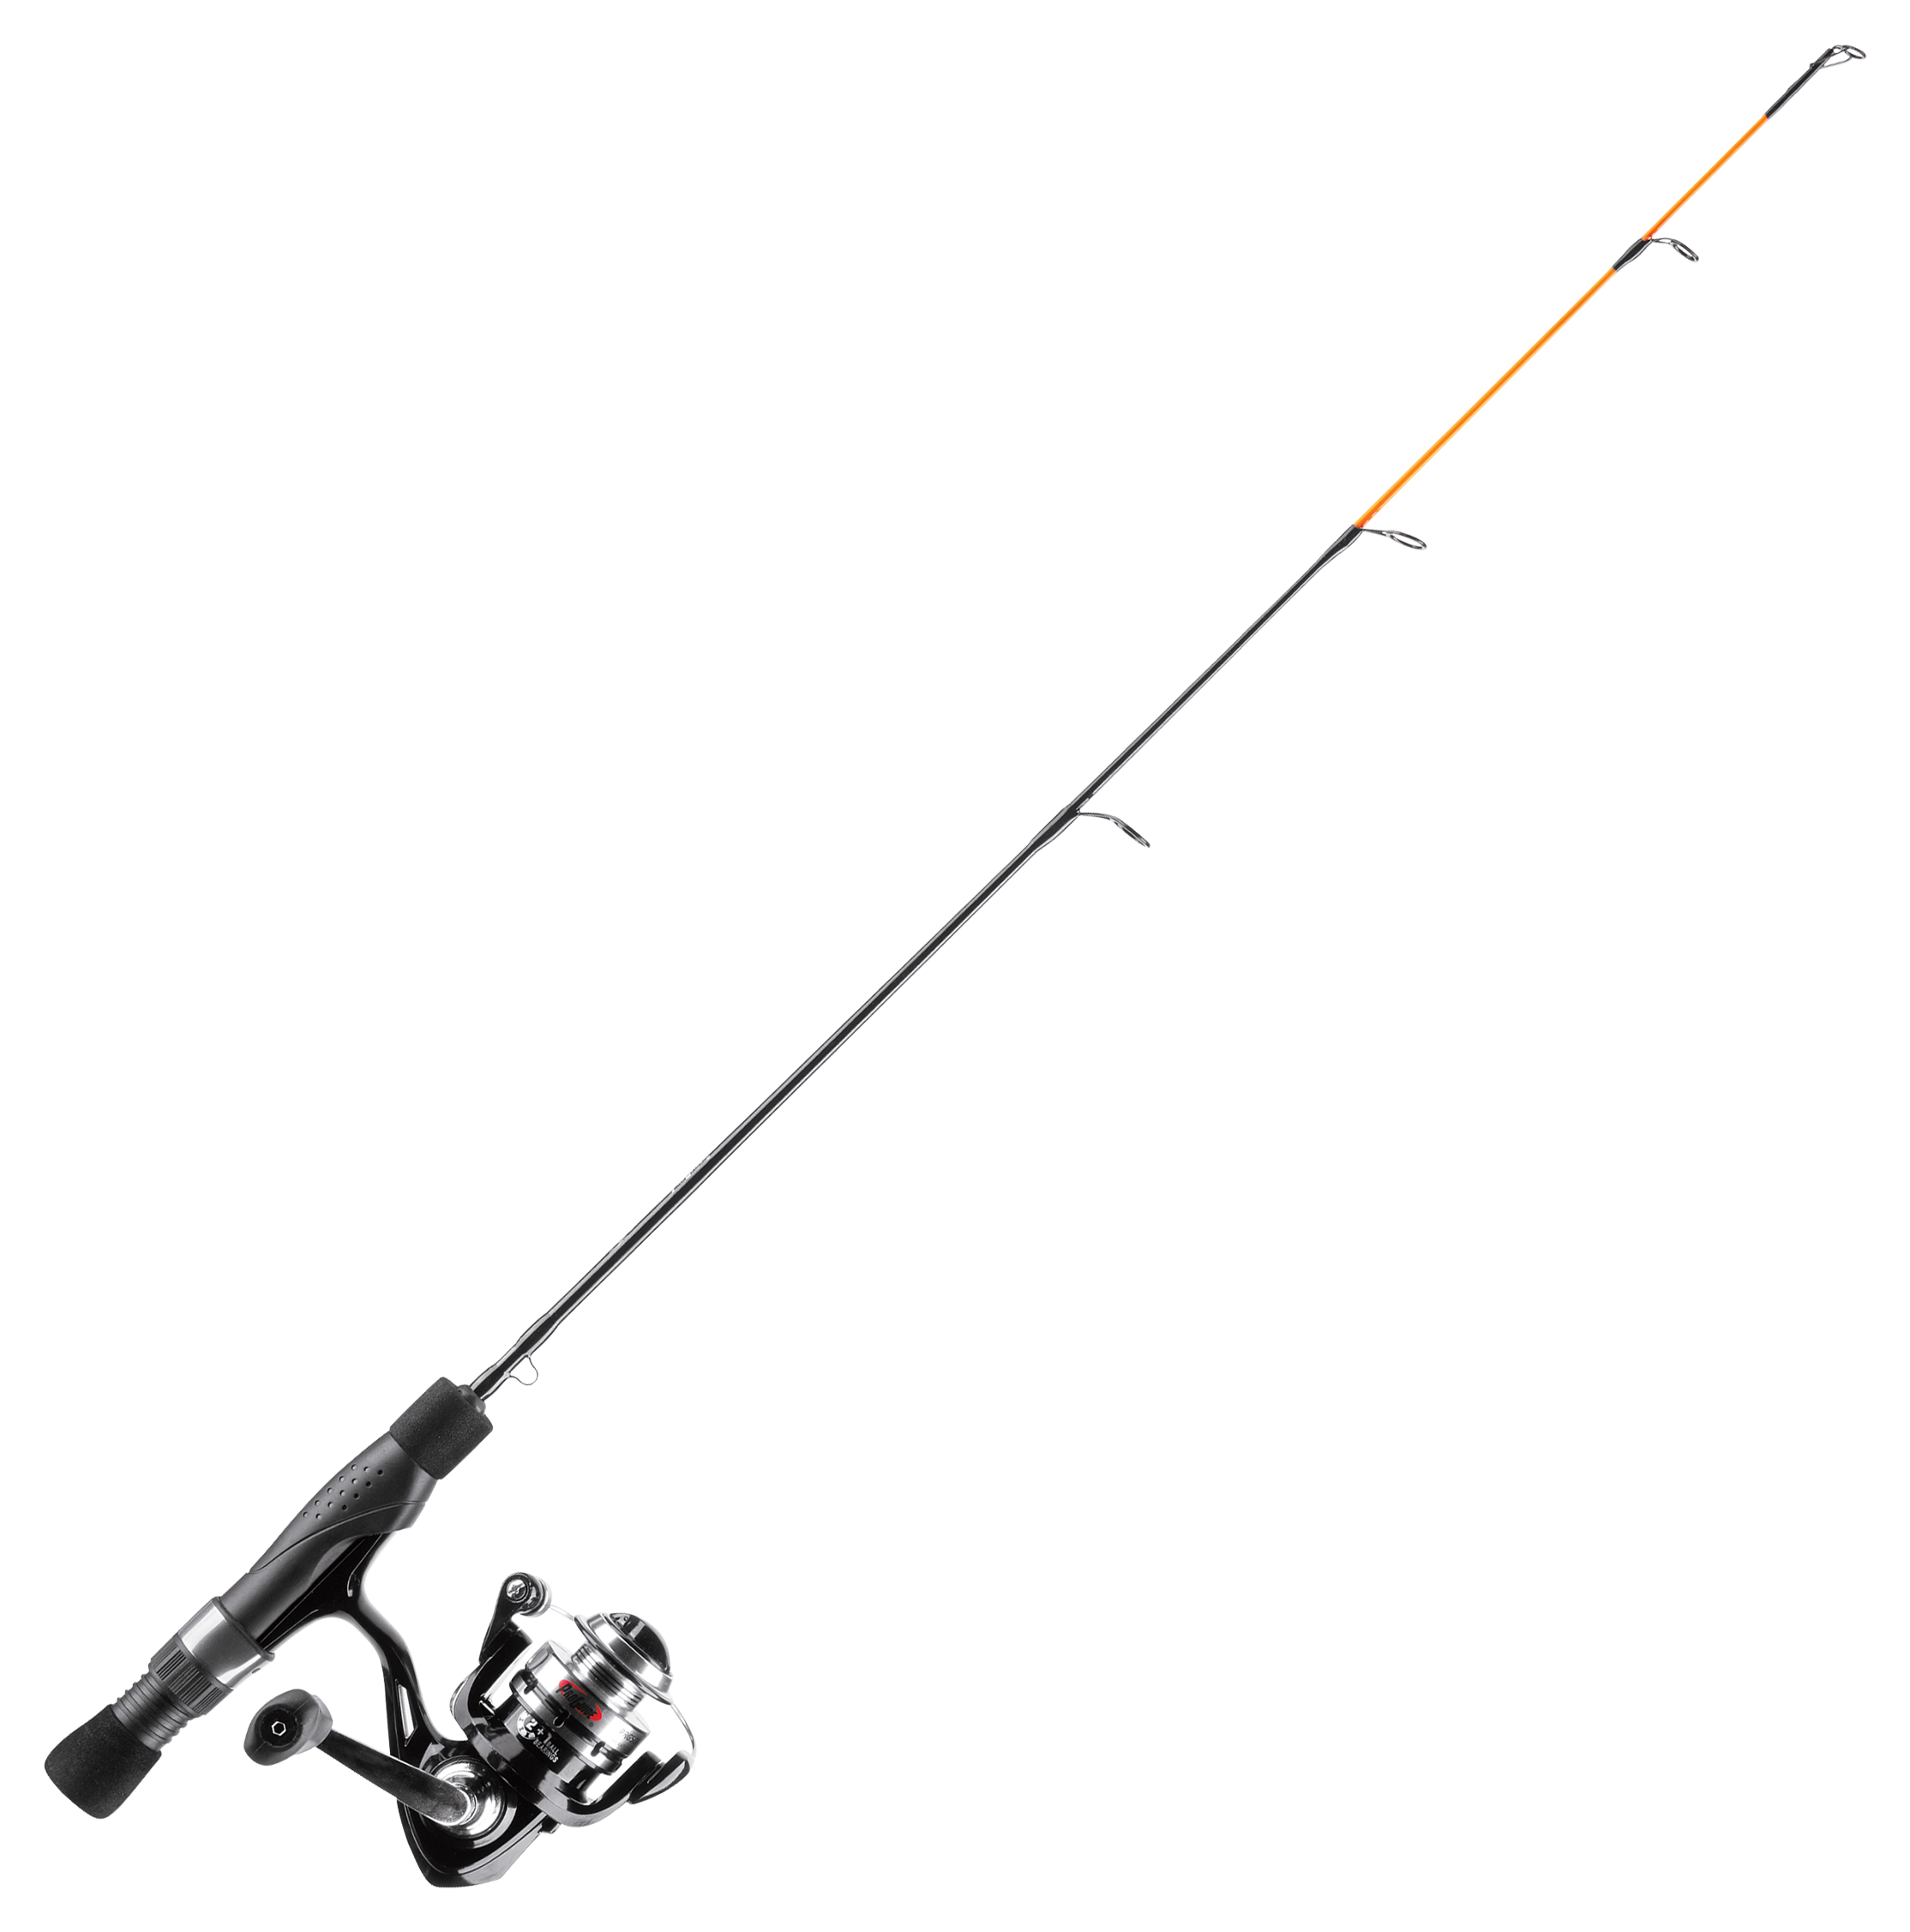 Bass Pro Shops Extreme Spinning Combo - 20 - 6'9 - Med Light - 5:6:1 - Green/Blue